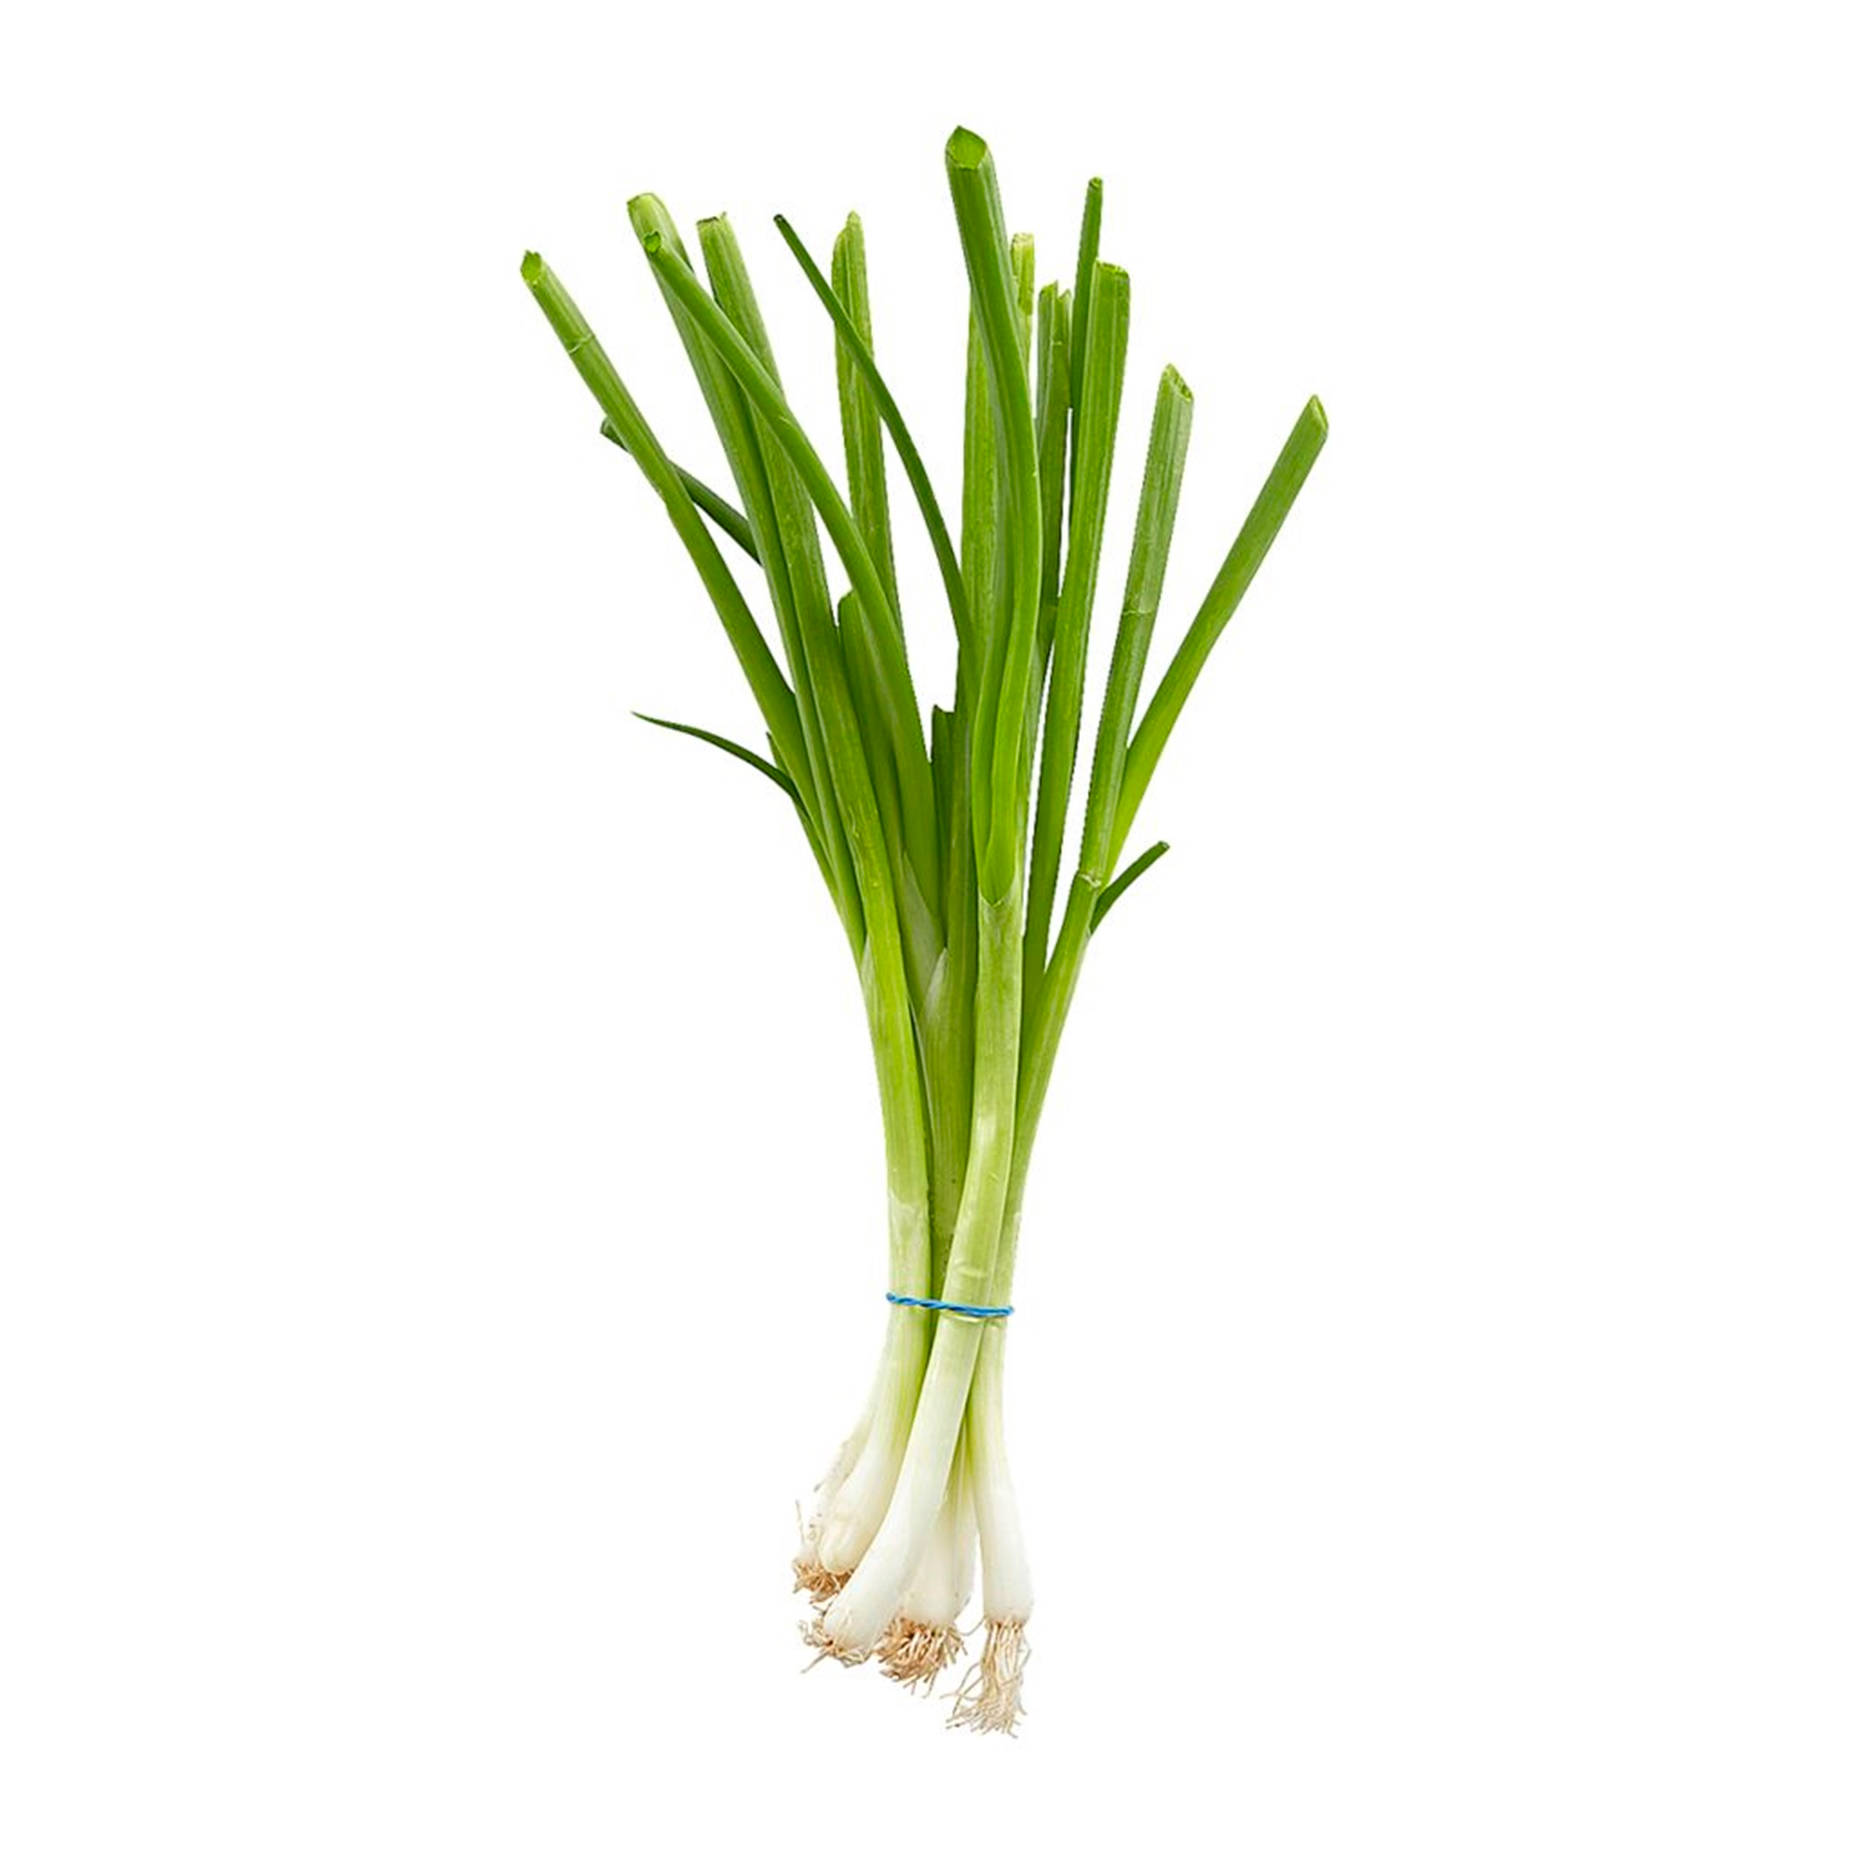 Freshly harvested commercial bundle of green onions Wallpaper